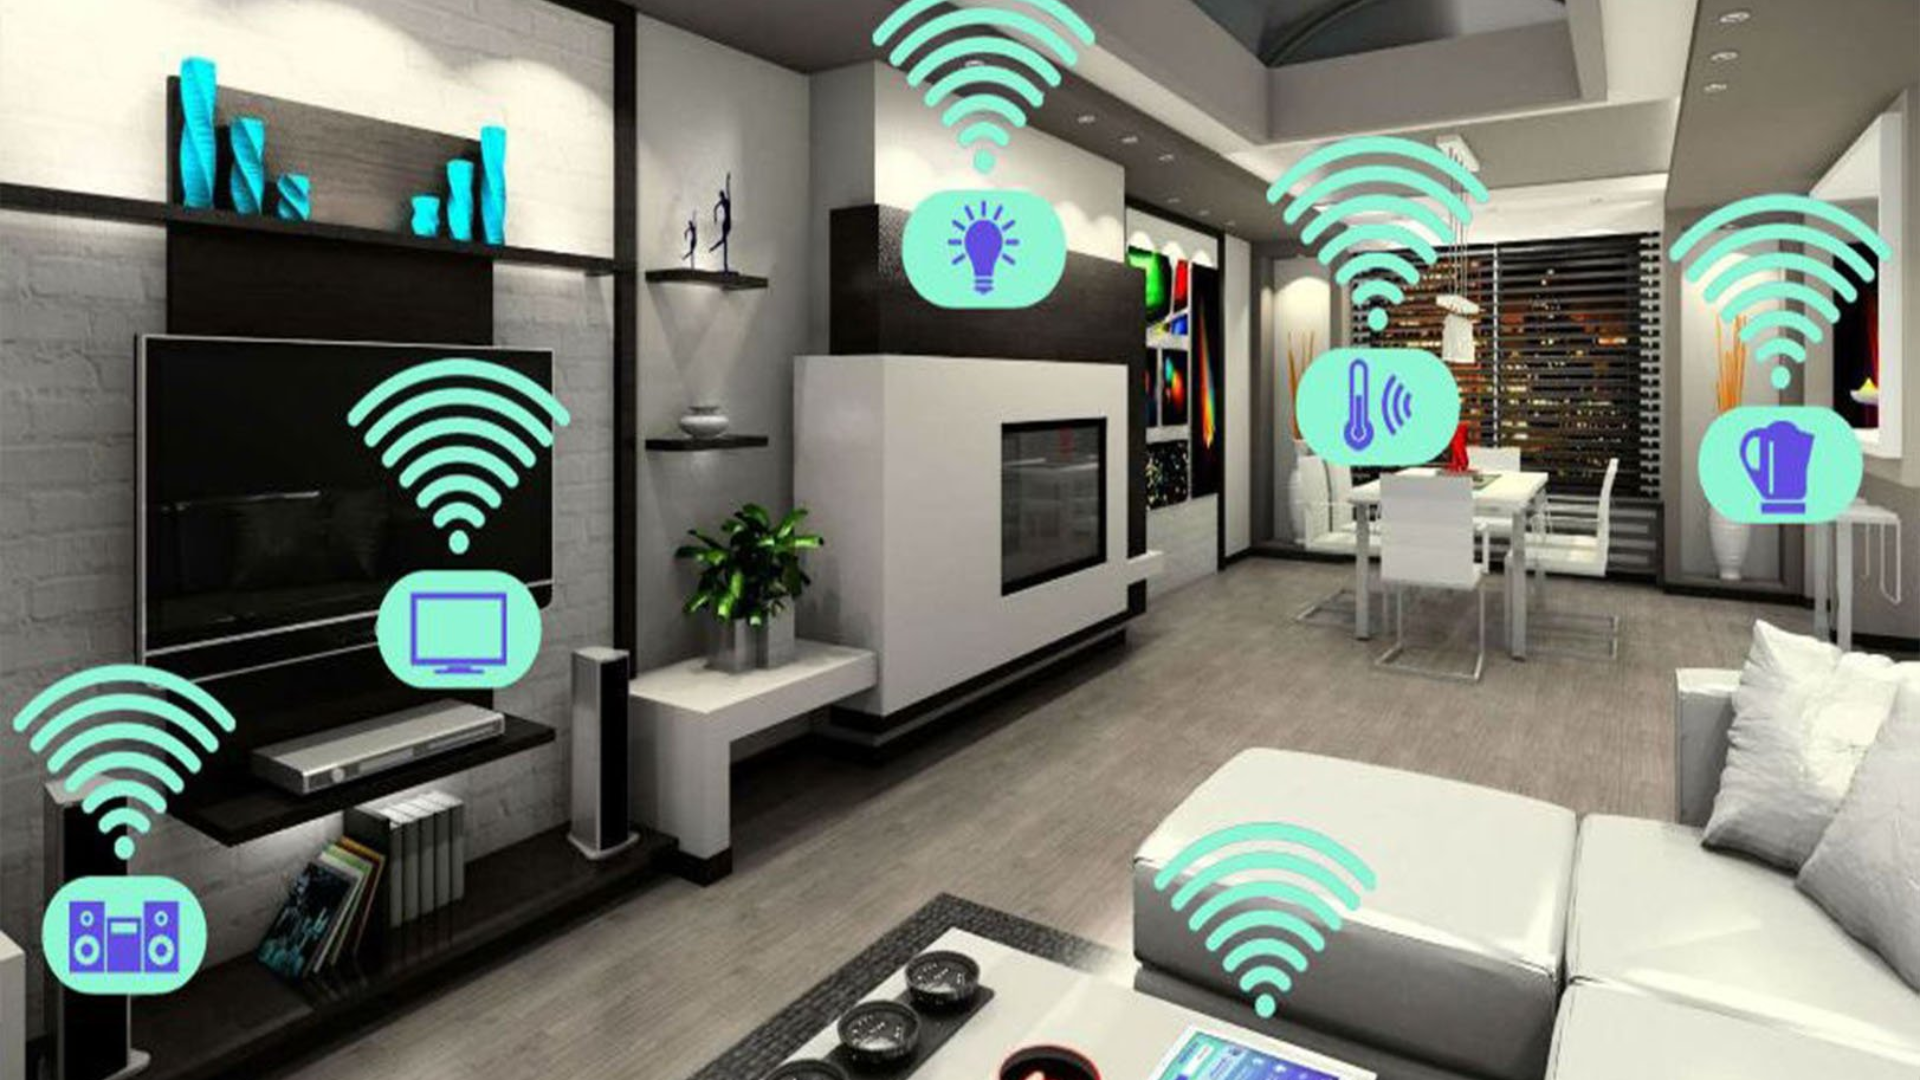 What’s New in Smart Home Technology Dubai?